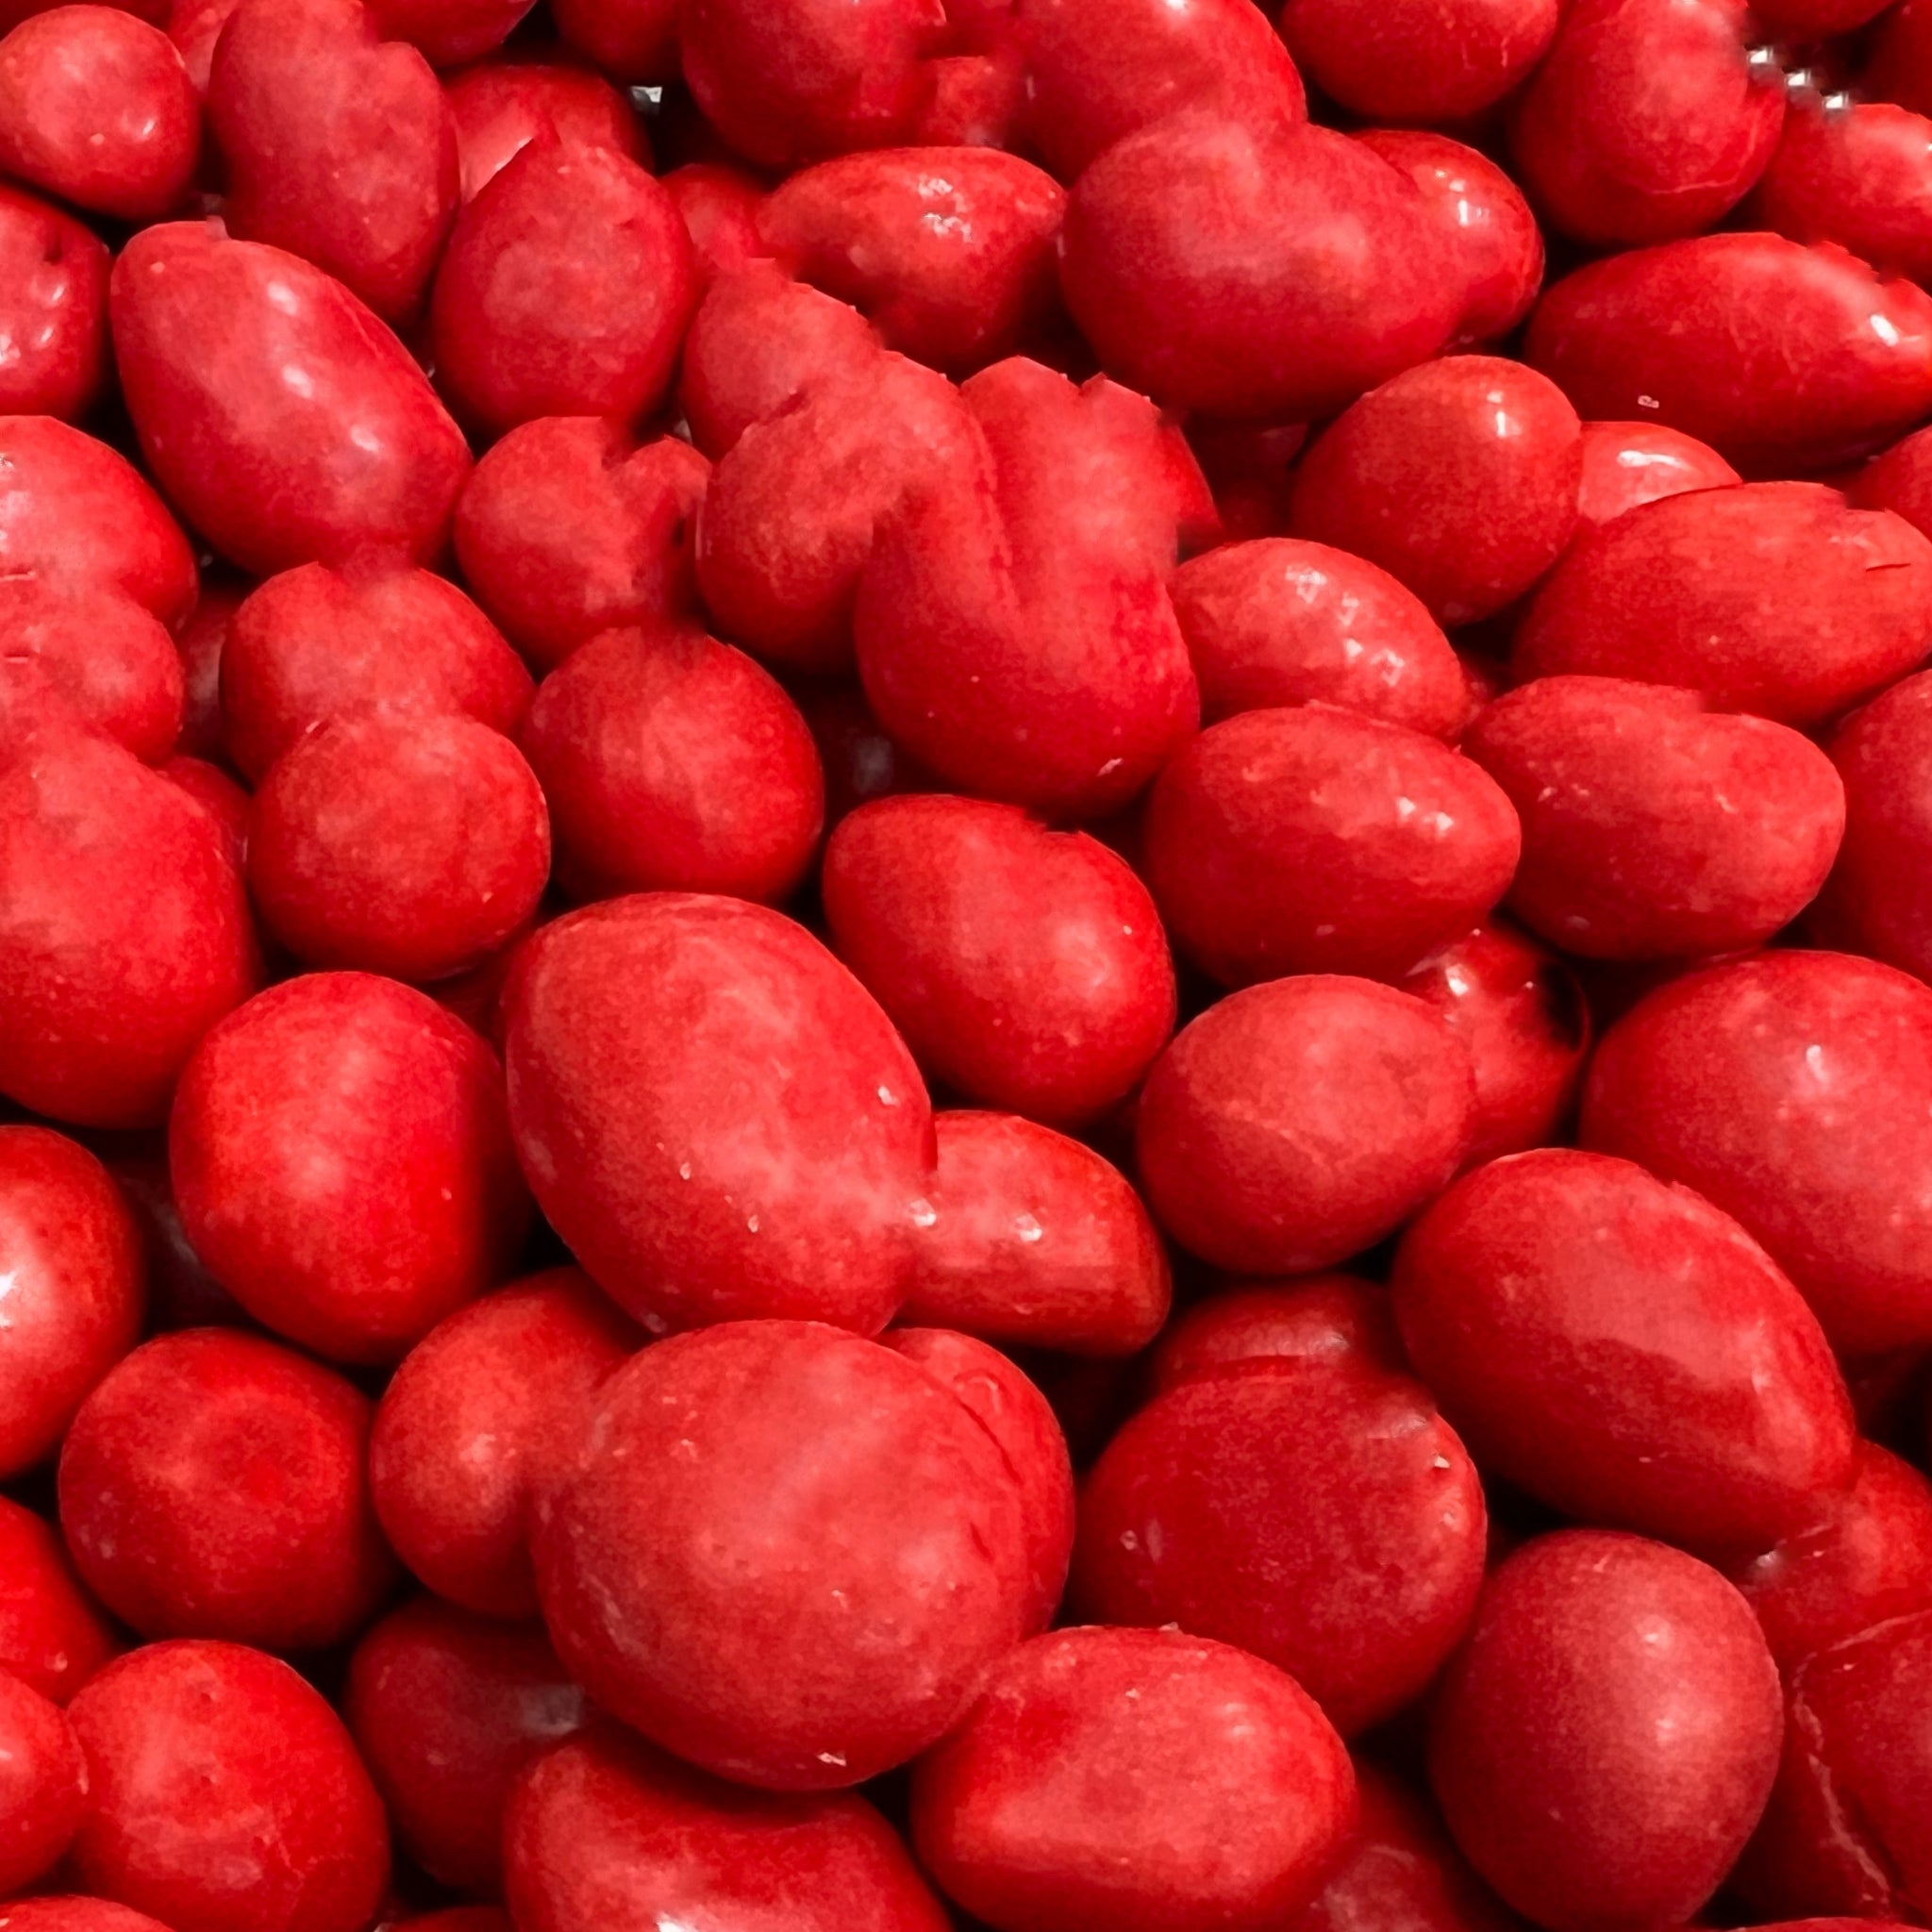 Boston Baked Beans.  Roasted peanuts coated in a brick red candy coating.  